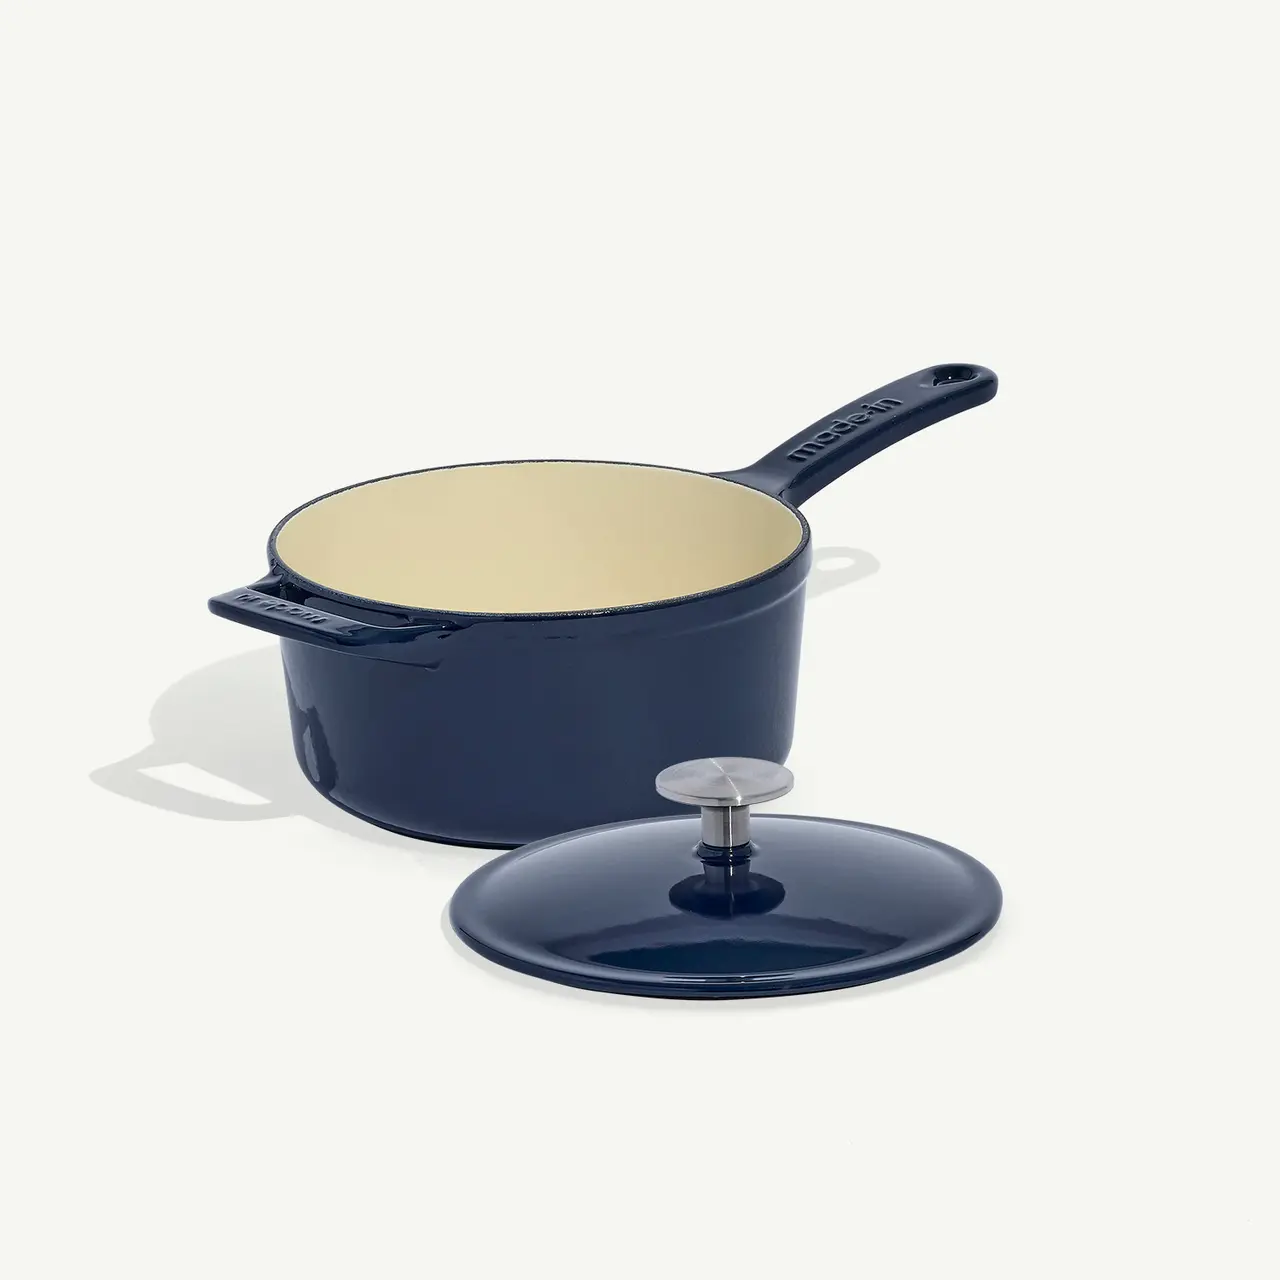 A navy blue saucepan with a matching lid placed beside it on a light background.